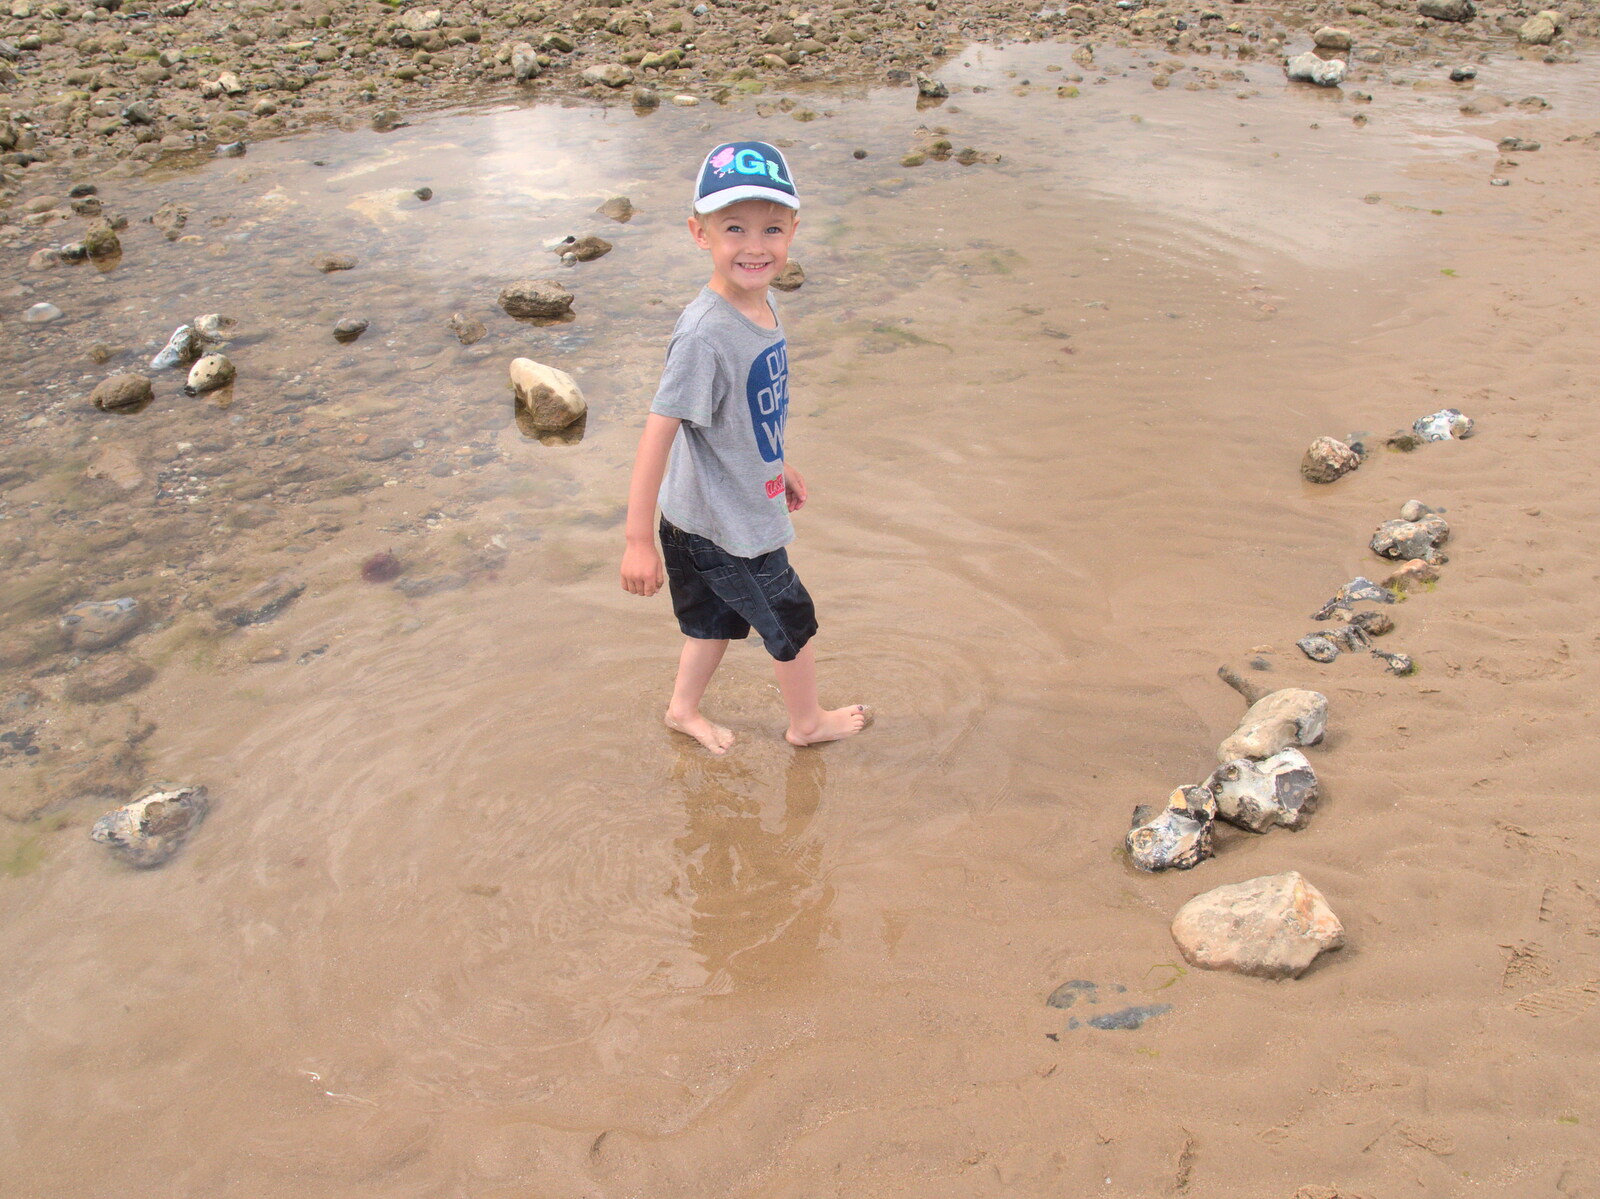 Gabes in a rock pool from Camping in West Runton, North Norfolk - 30th July 2016